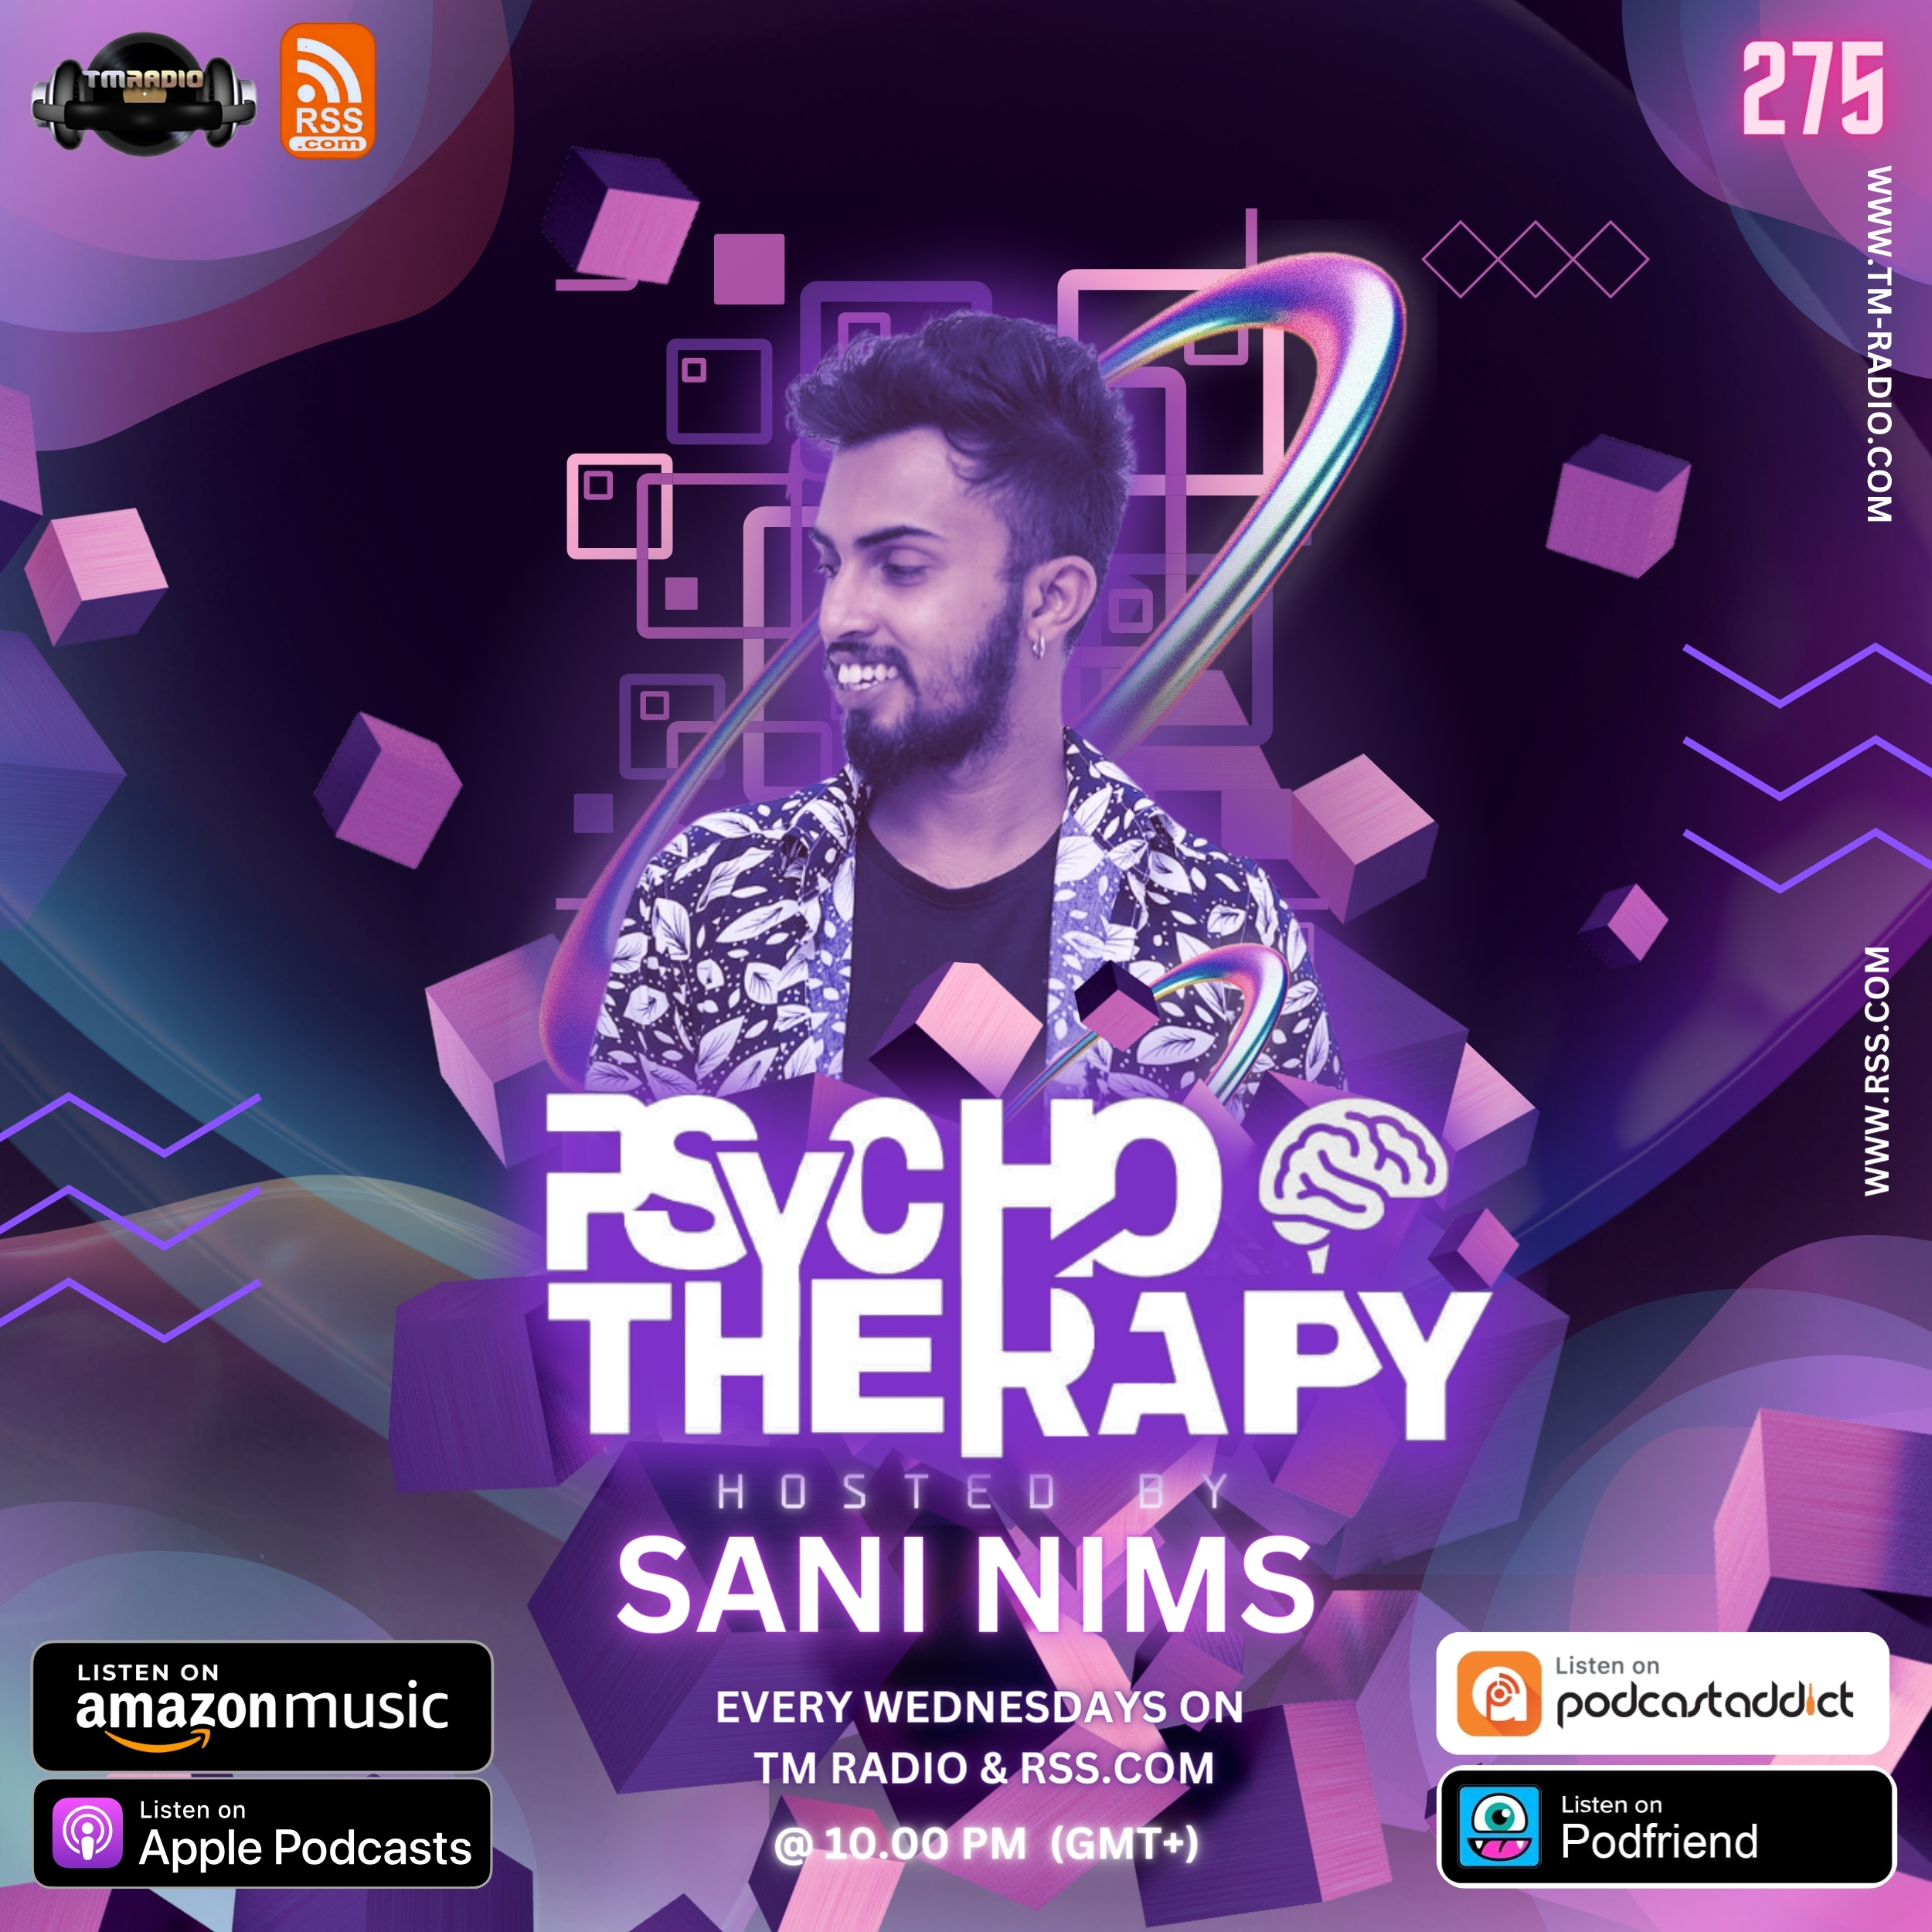 PSYCHO THERAPY EP 275 BY SANI NIMS ON TM RADIO (from January 10th)